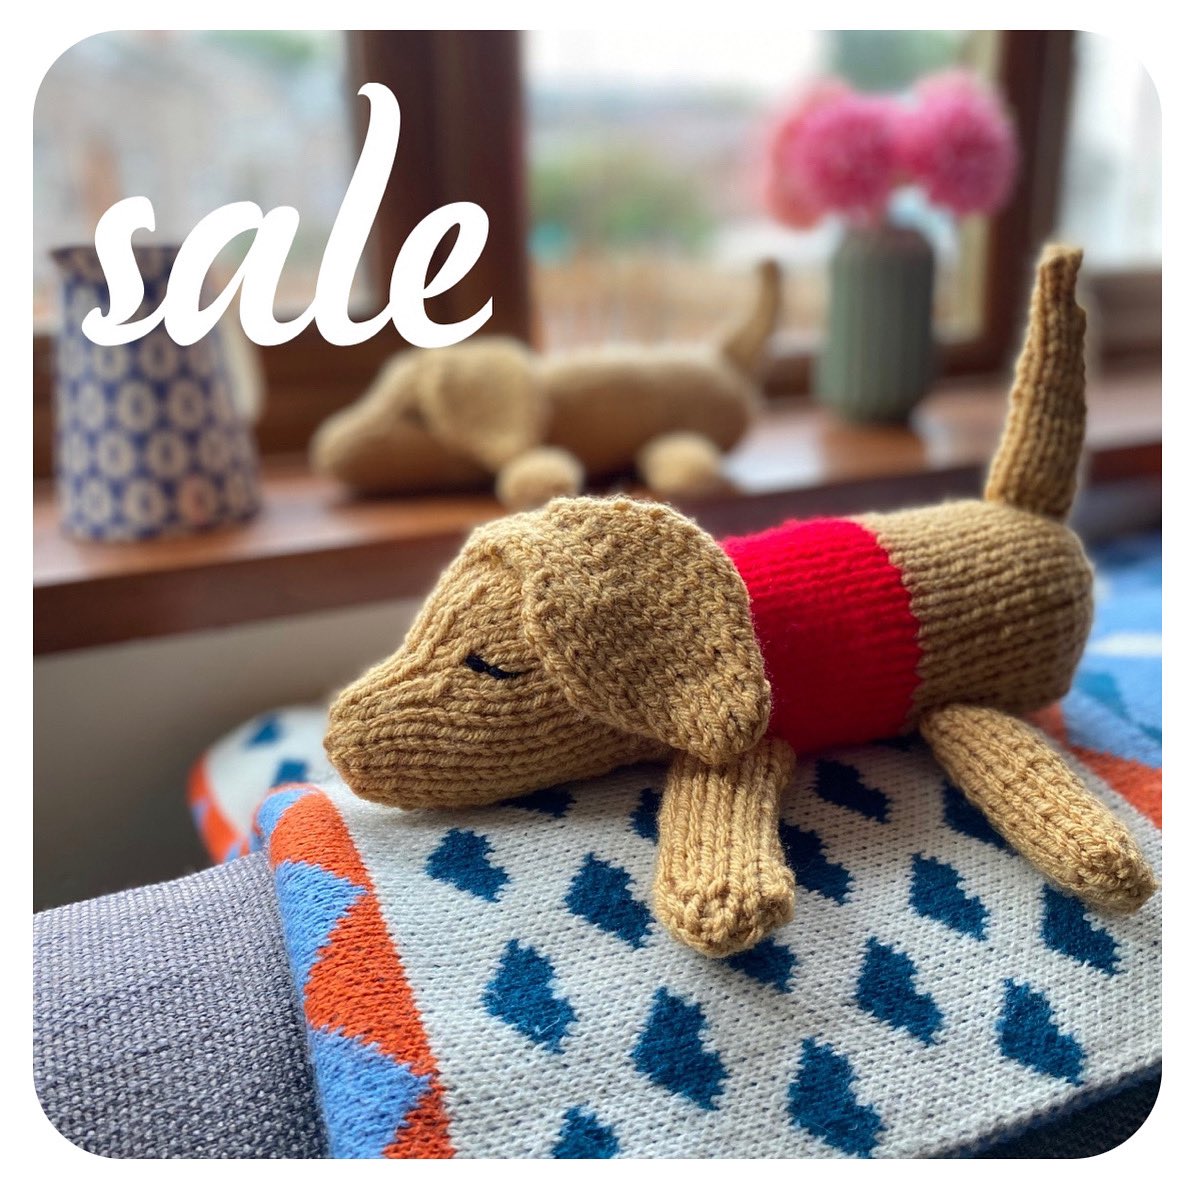 Now with 50% off in the Summer #sale on #notonthehighstreet! 
notonthehighstreet.com/gifthorseknitk…